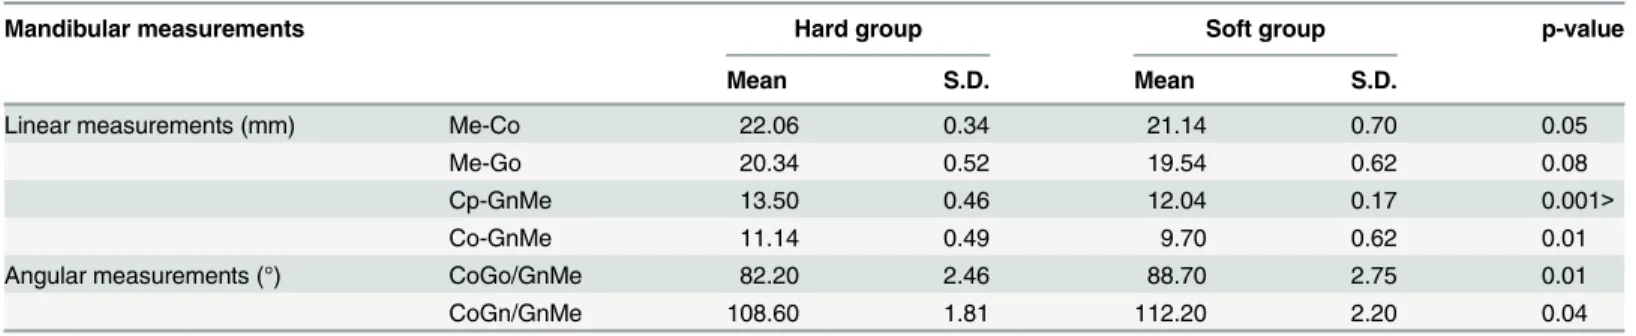 Table 1. Comparison of mandibular measurements between the hard- and soft-diet groups.